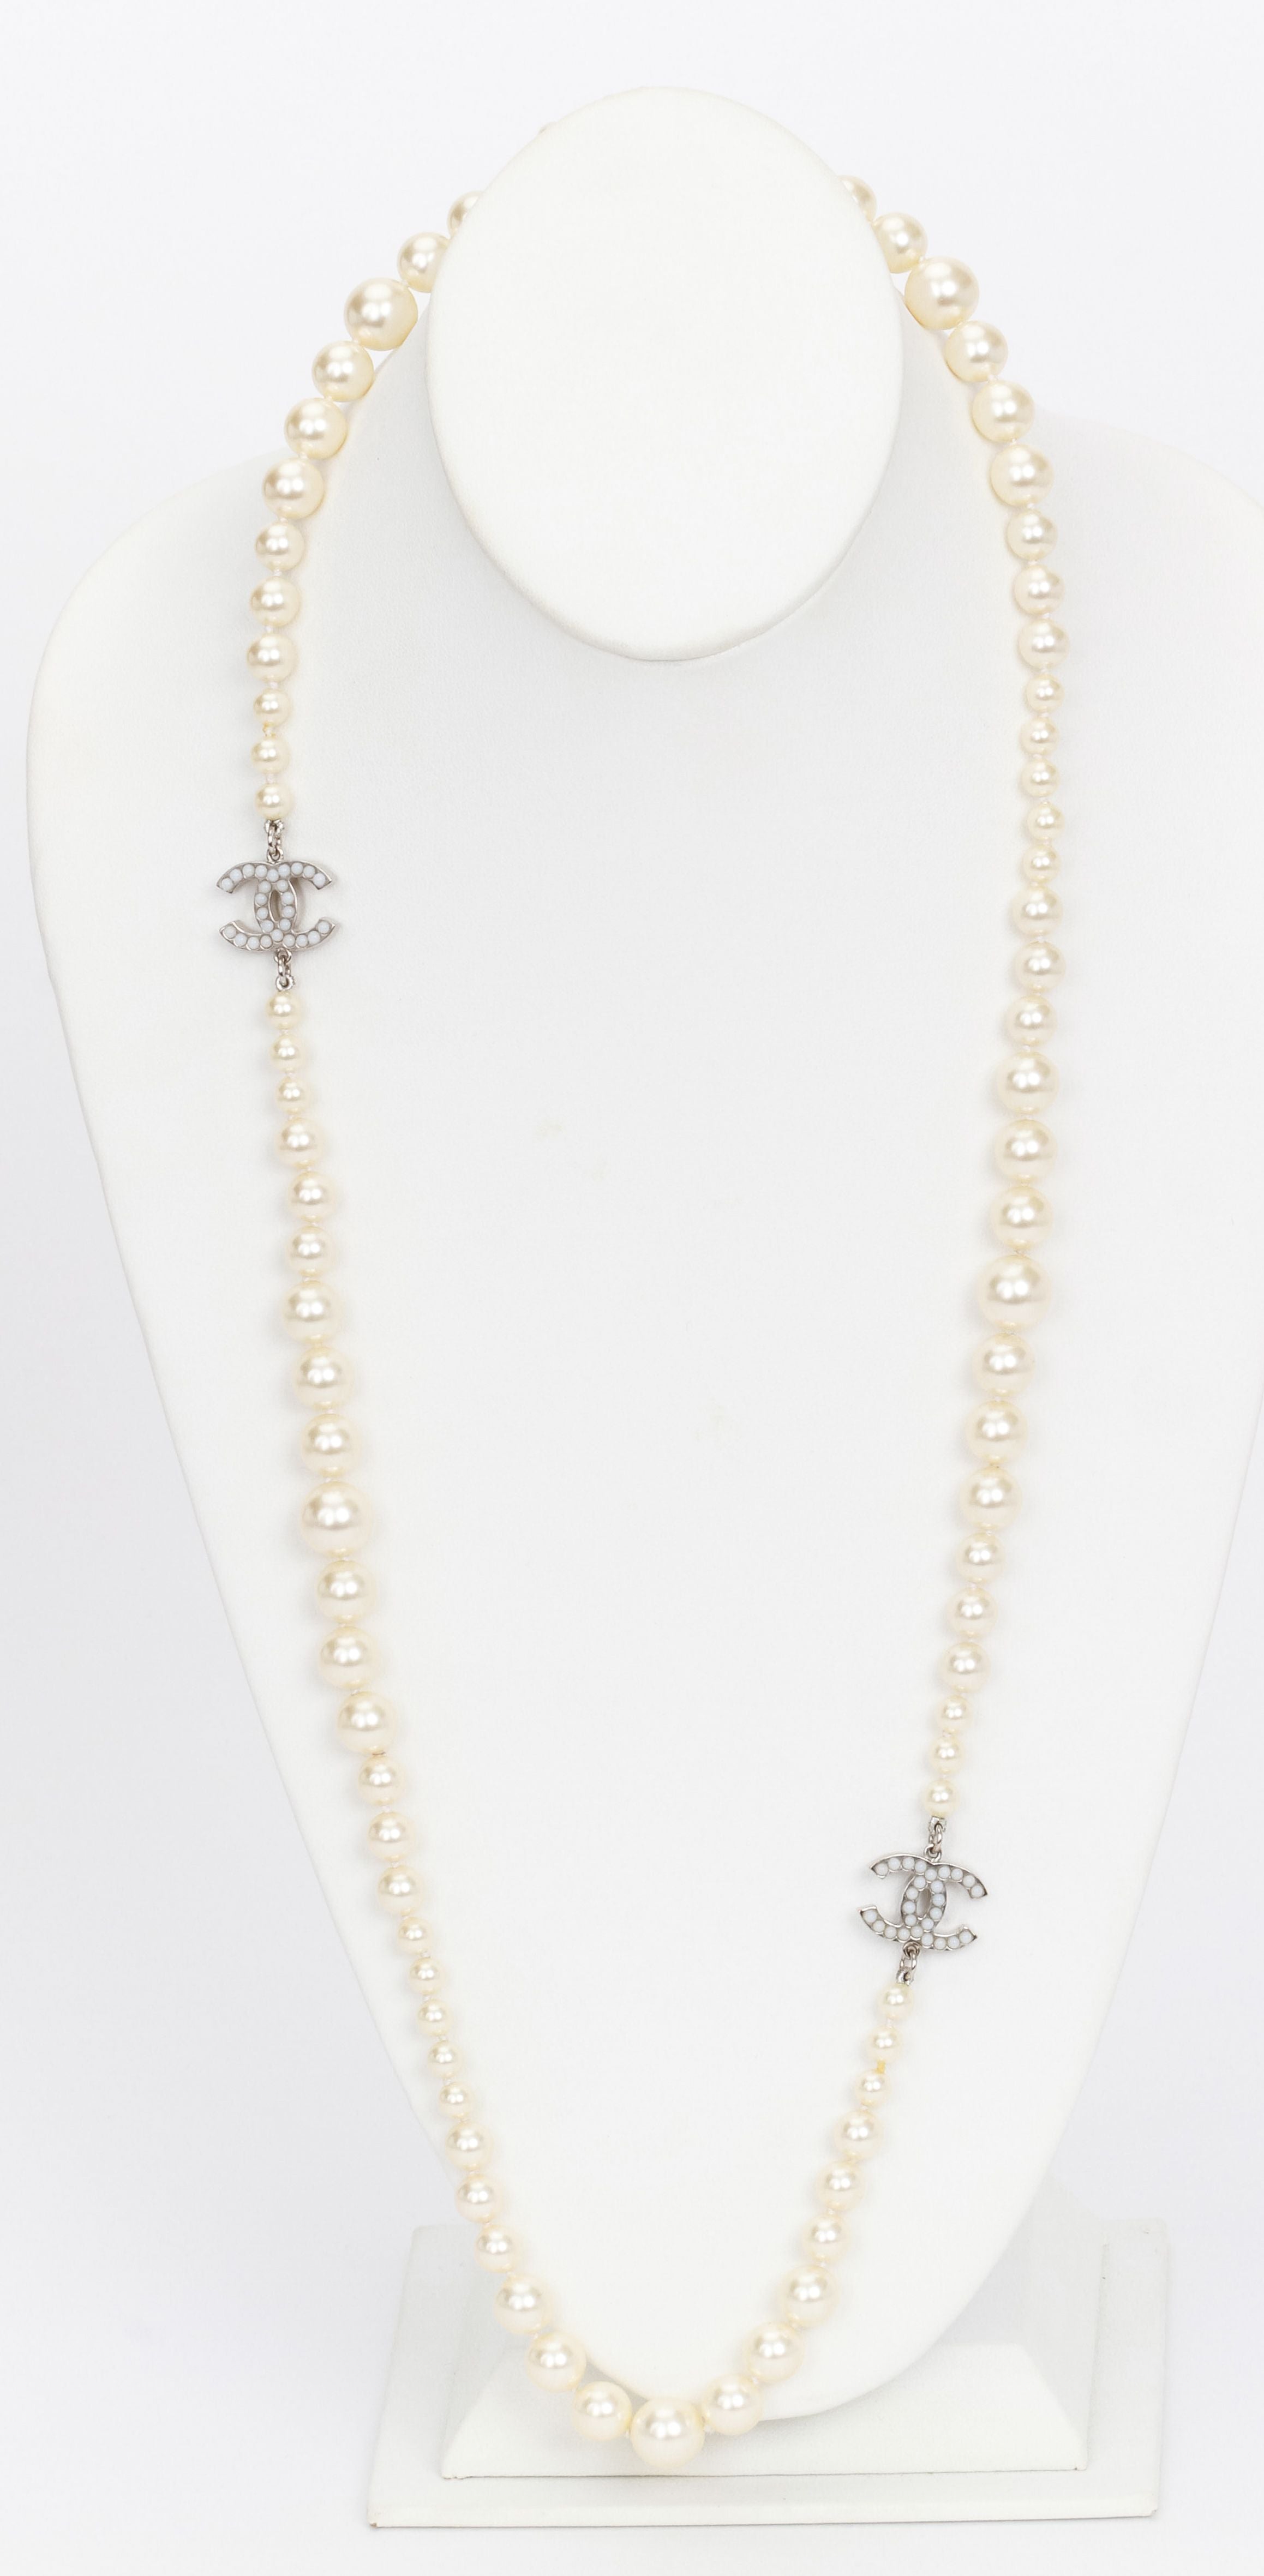 Chanel spring 2012 long pearl necklace - Vintage Lux